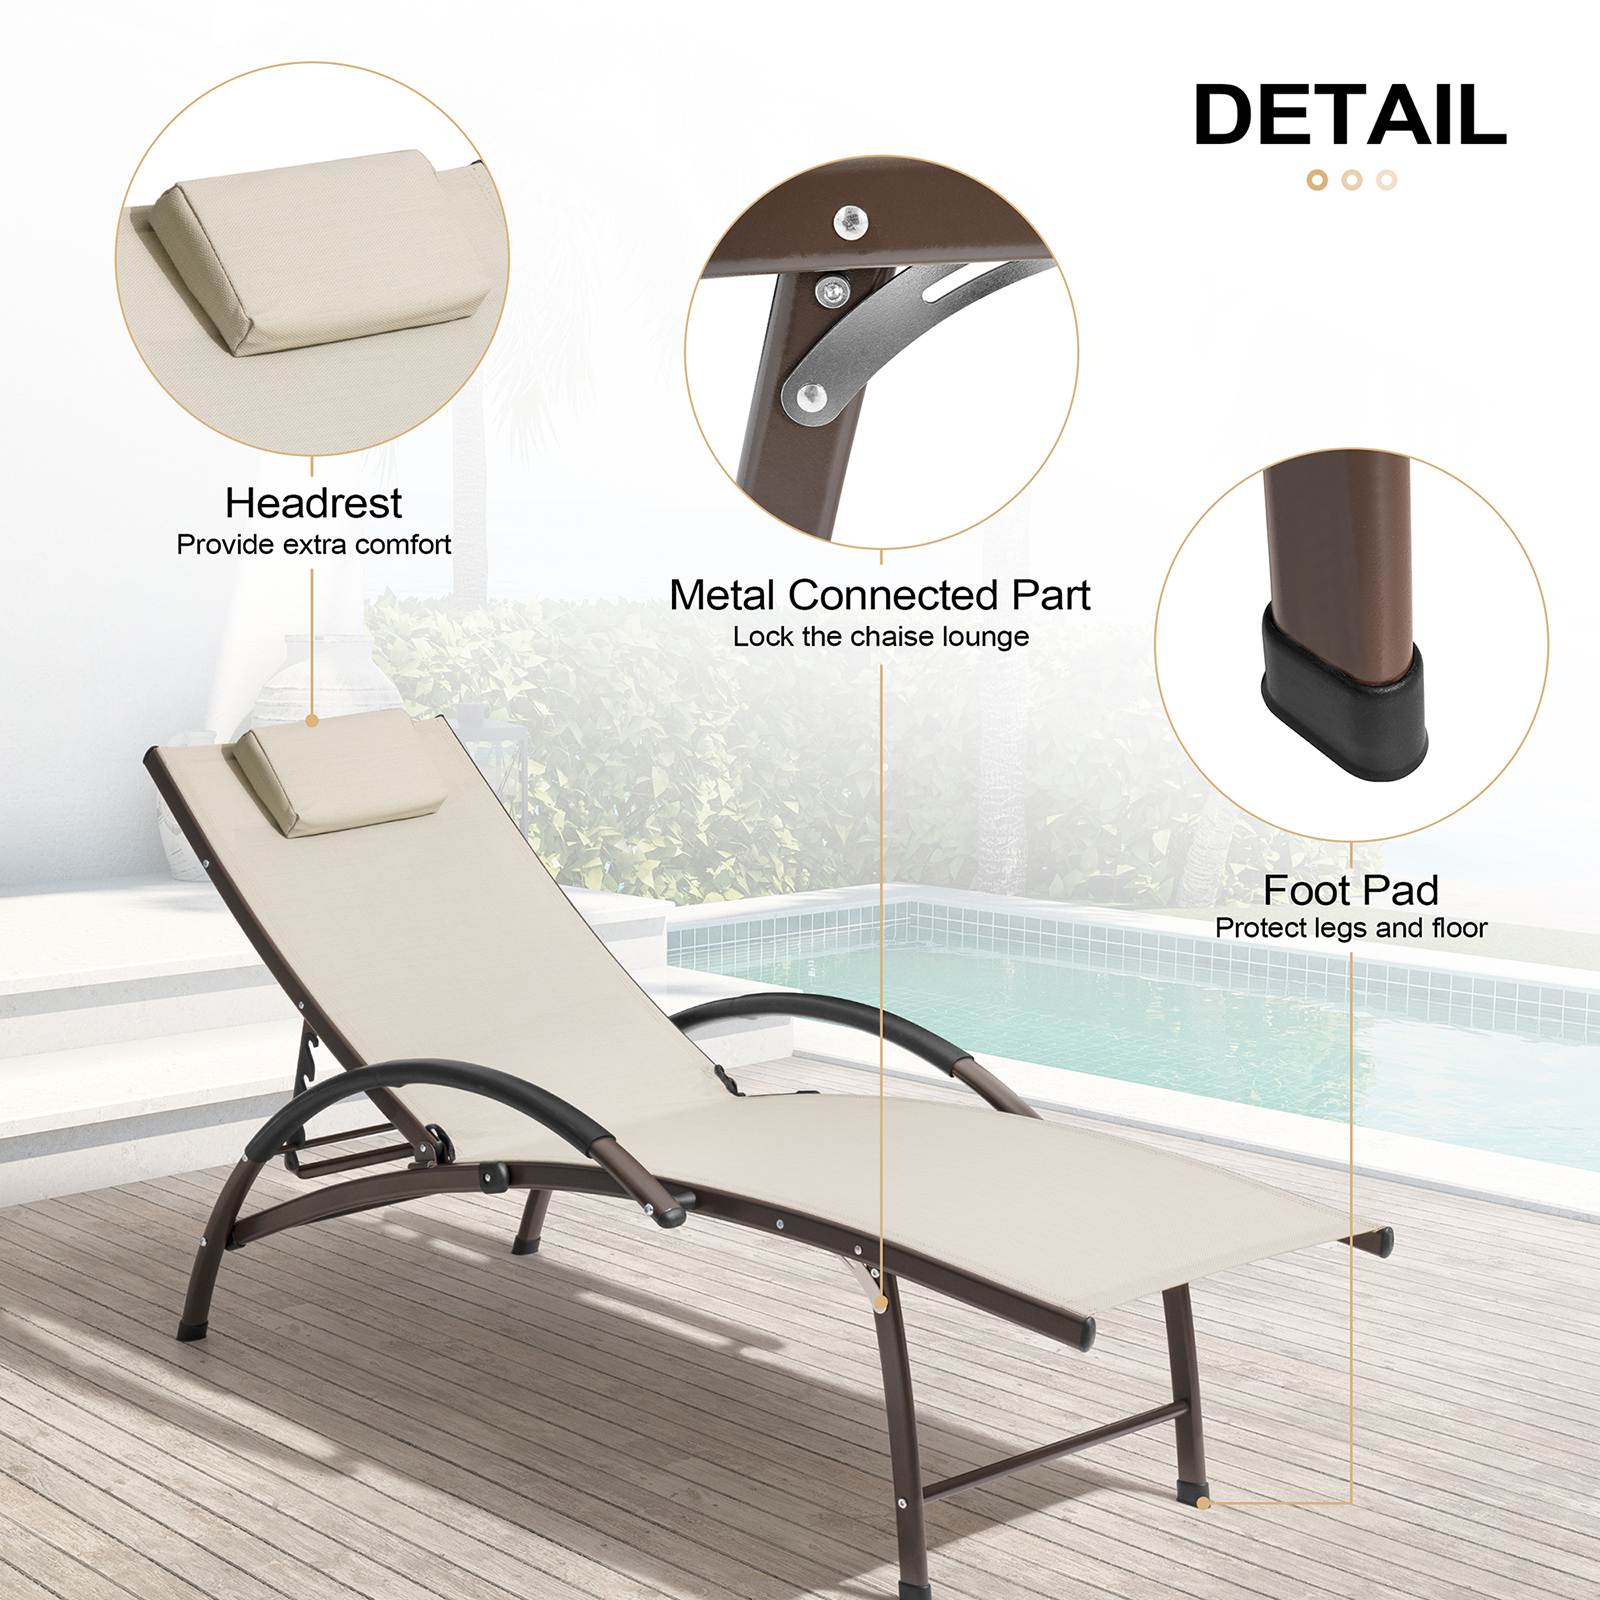 Crestlive Products Aluminum Outdoor Folding Reclining Chaise Lounge Chair in Tan - image 4 of 7